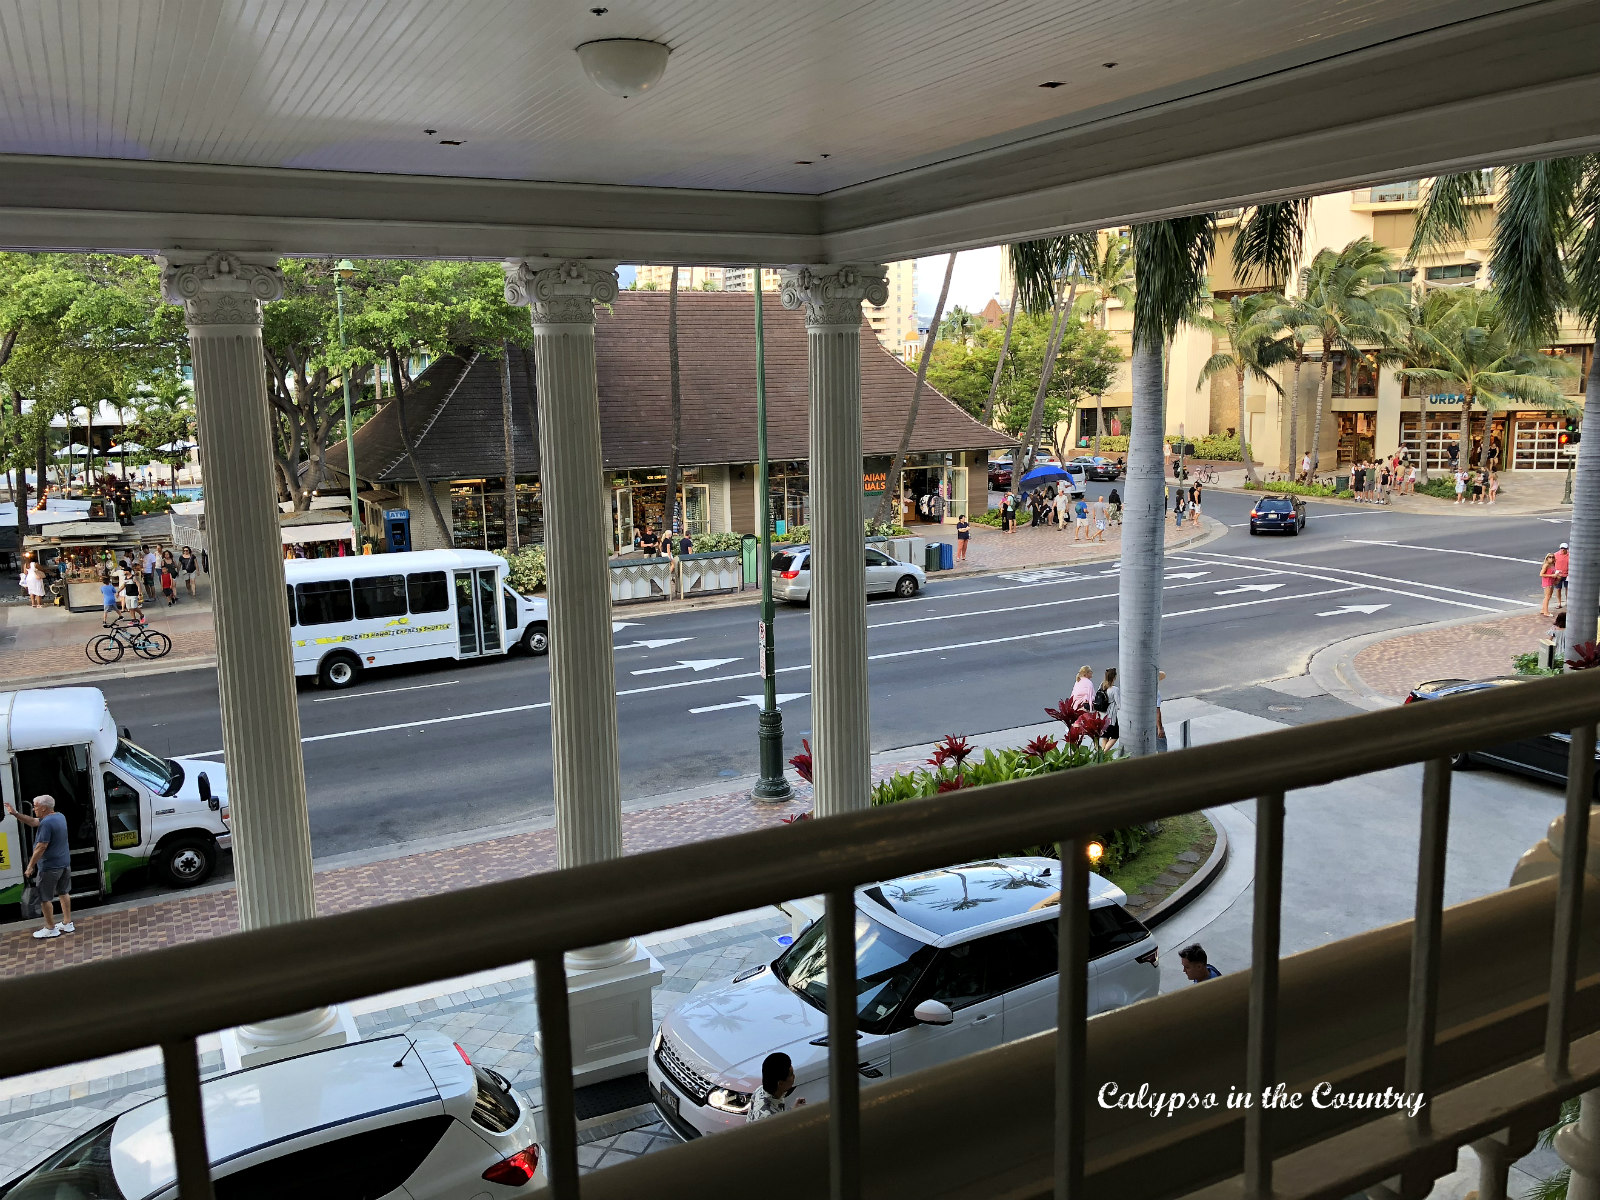 Hotel balcony overlooking valet and the streets of Waikiki